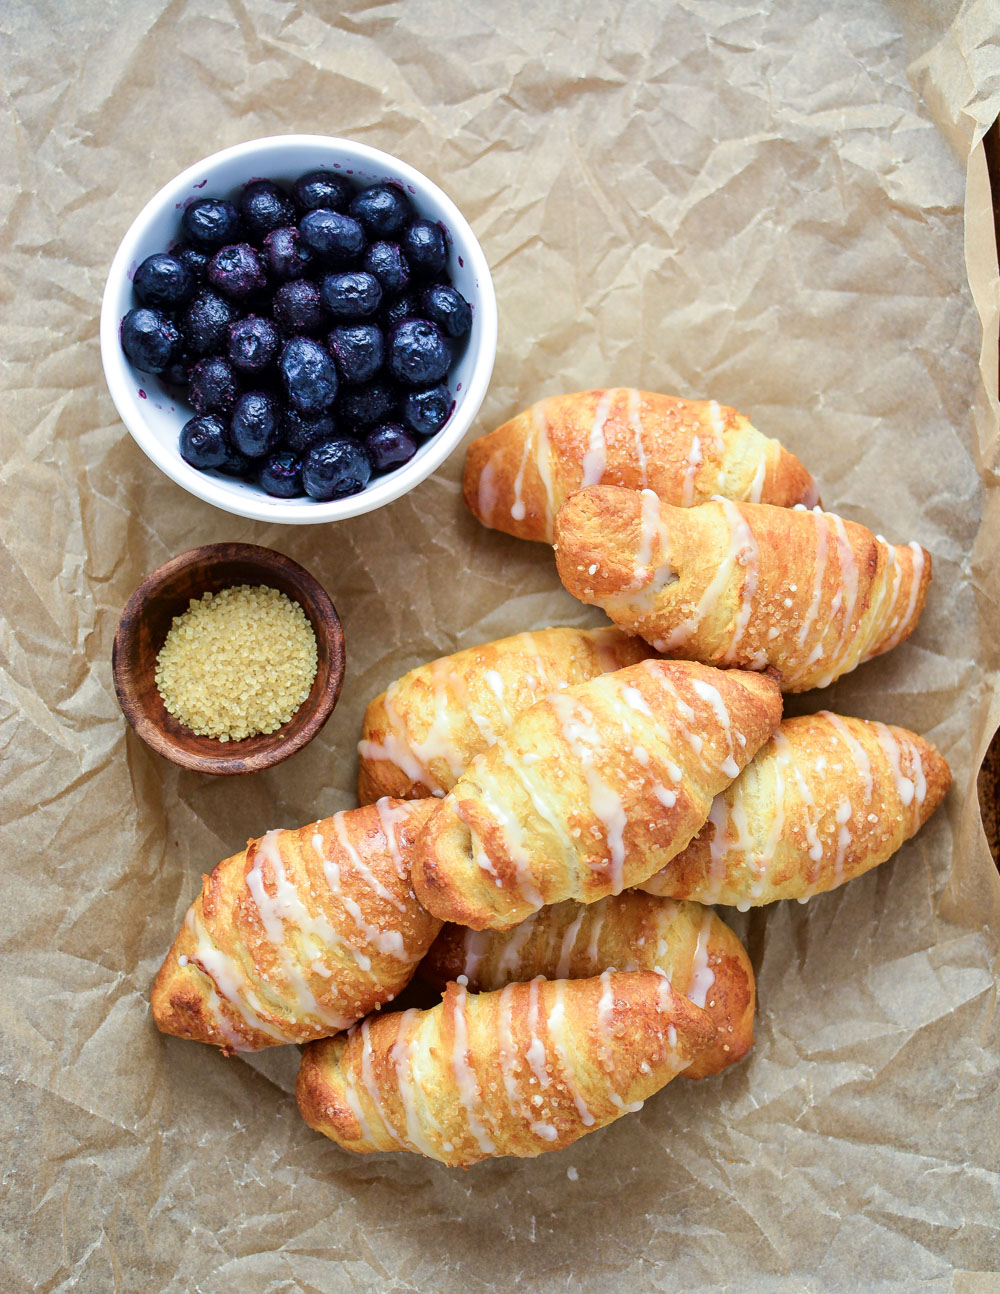 Blueberry Almond Crescent Rolls are the perfect quick and simple breakfast recipe using store bought crescent roll dough and just a handful of ingredients!